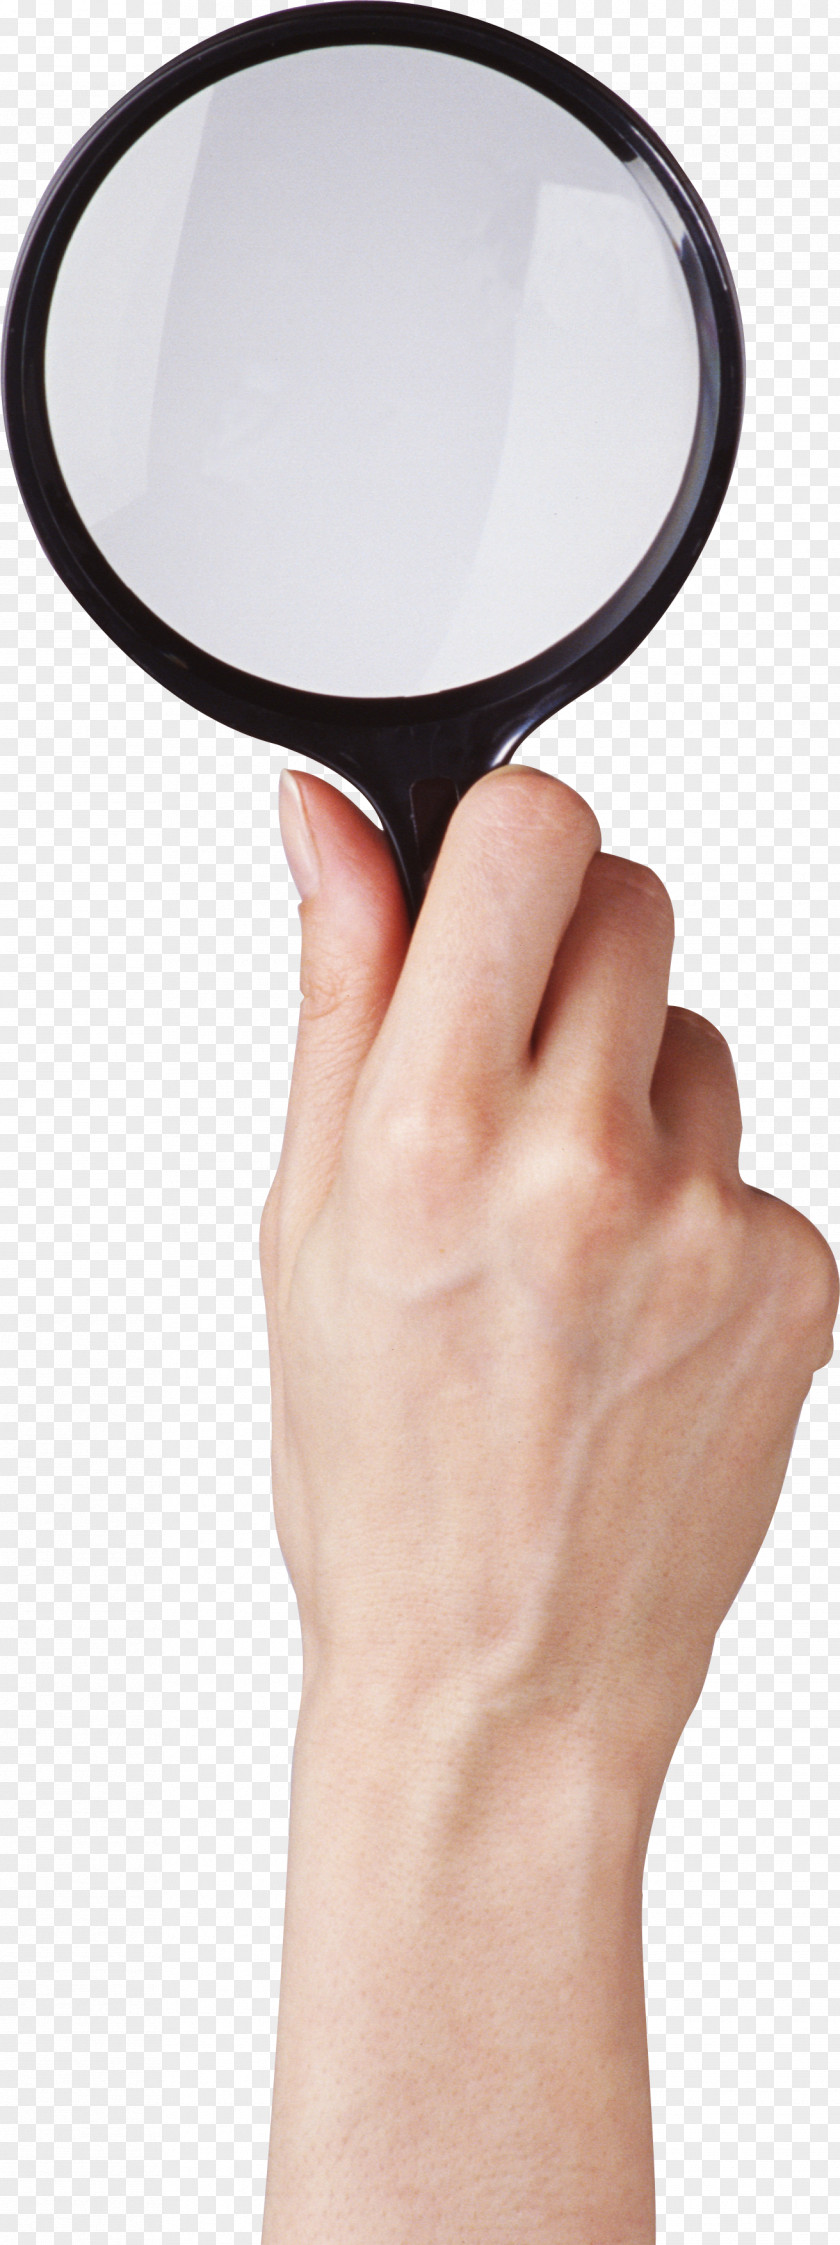 Loupe In Hand Image Magnifying Glass Light PNG